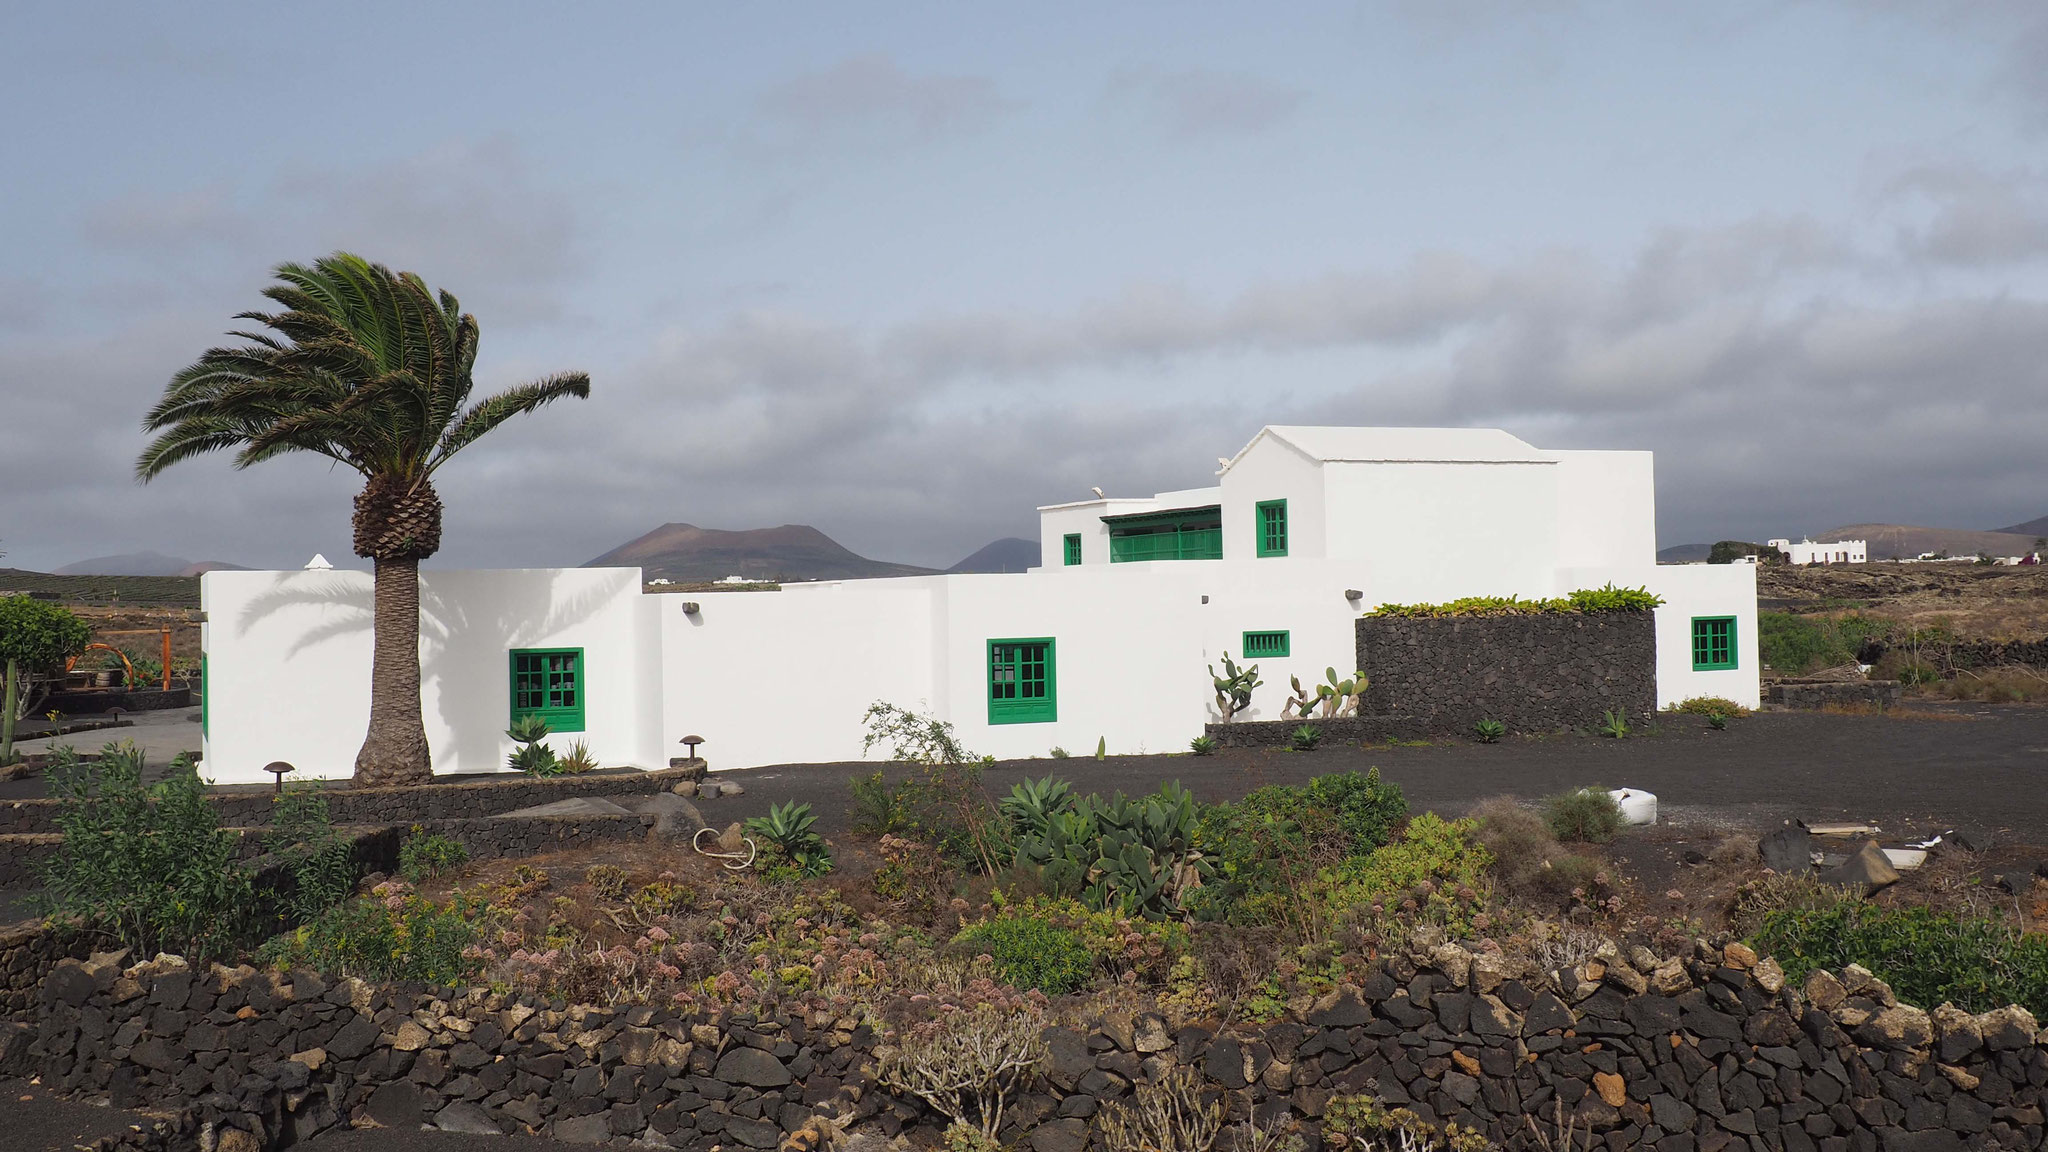 Les maisons blanches - Lanzarote - Canaries